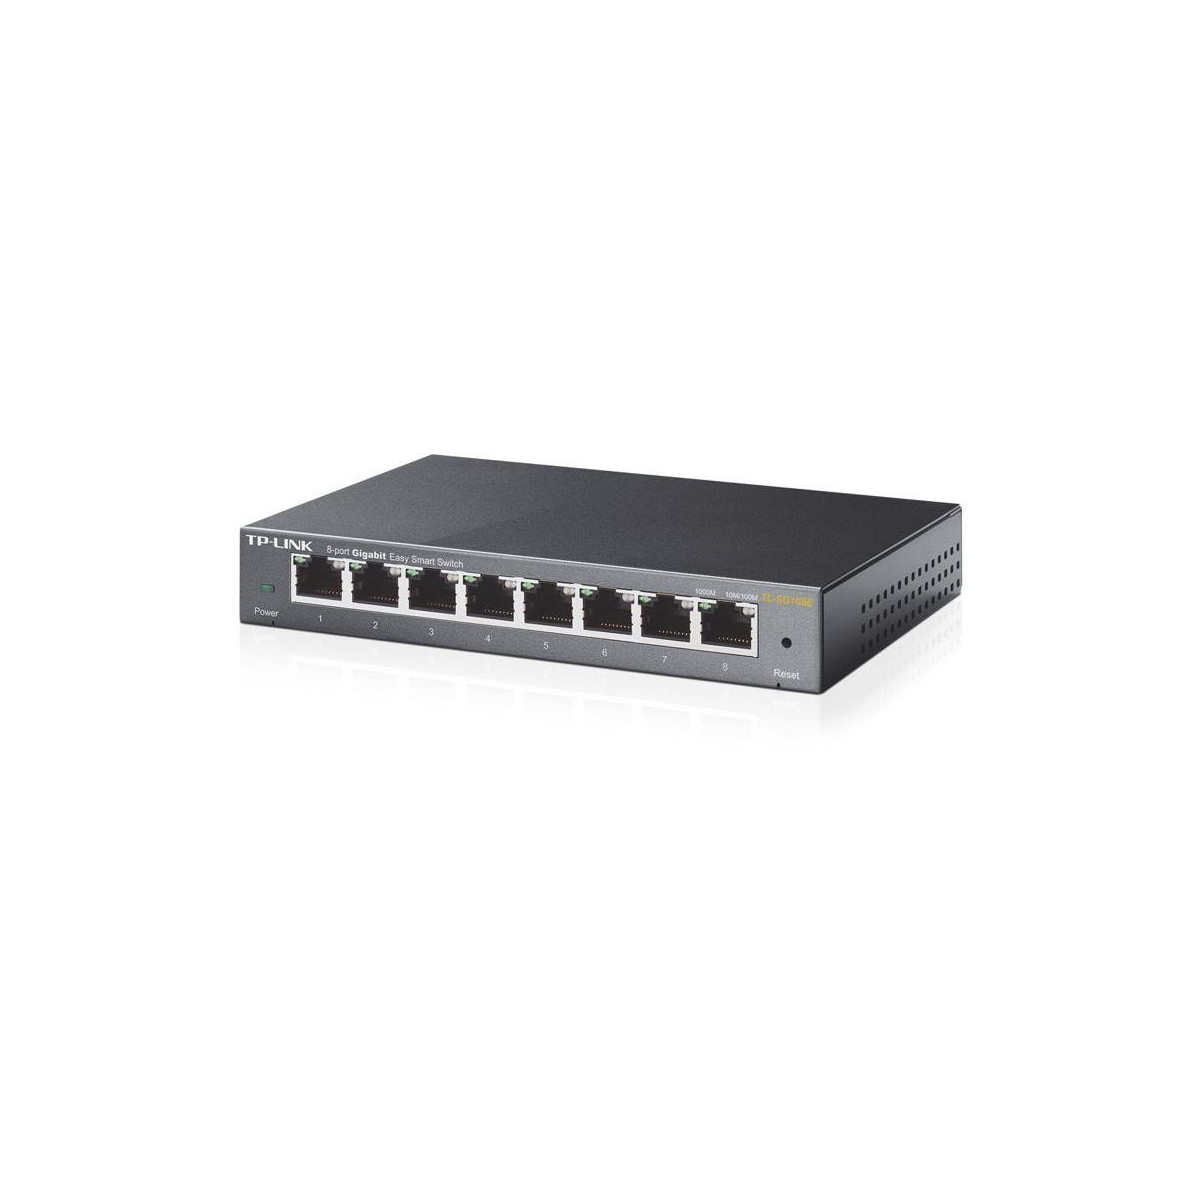 More about Switch TP-LINK TL-SG108E